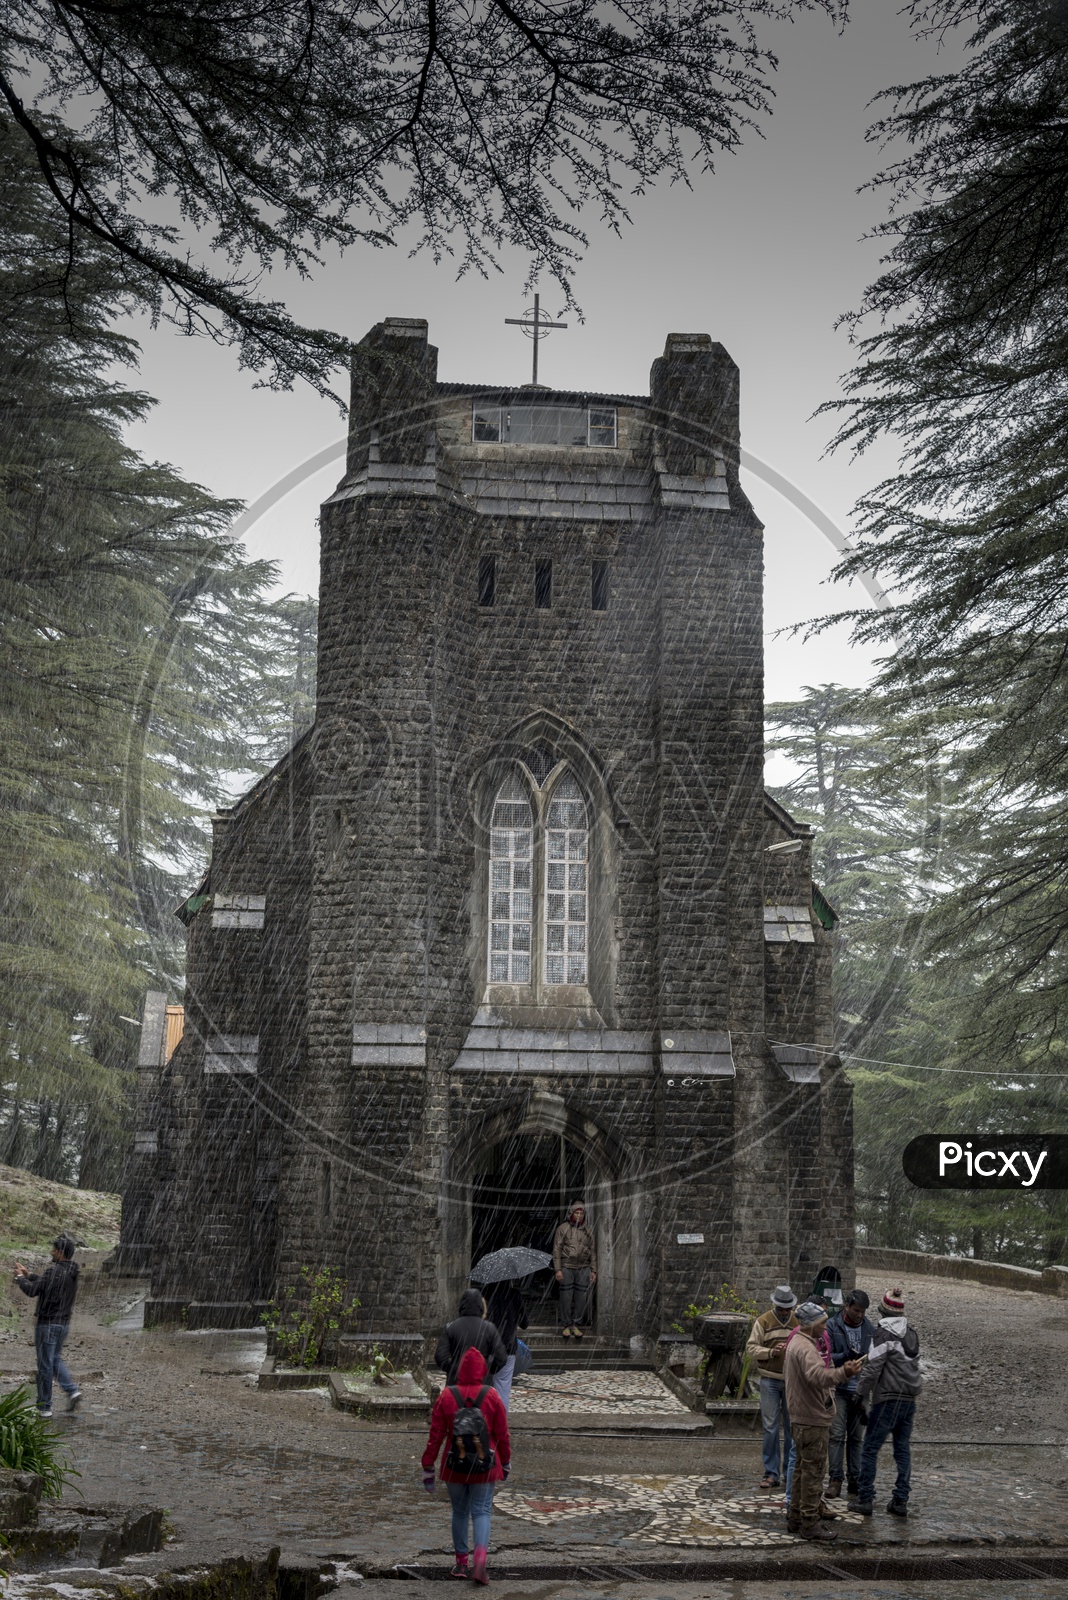 Snow Drizzling in-front of Church at Dharmasala, Himachal Pradesh